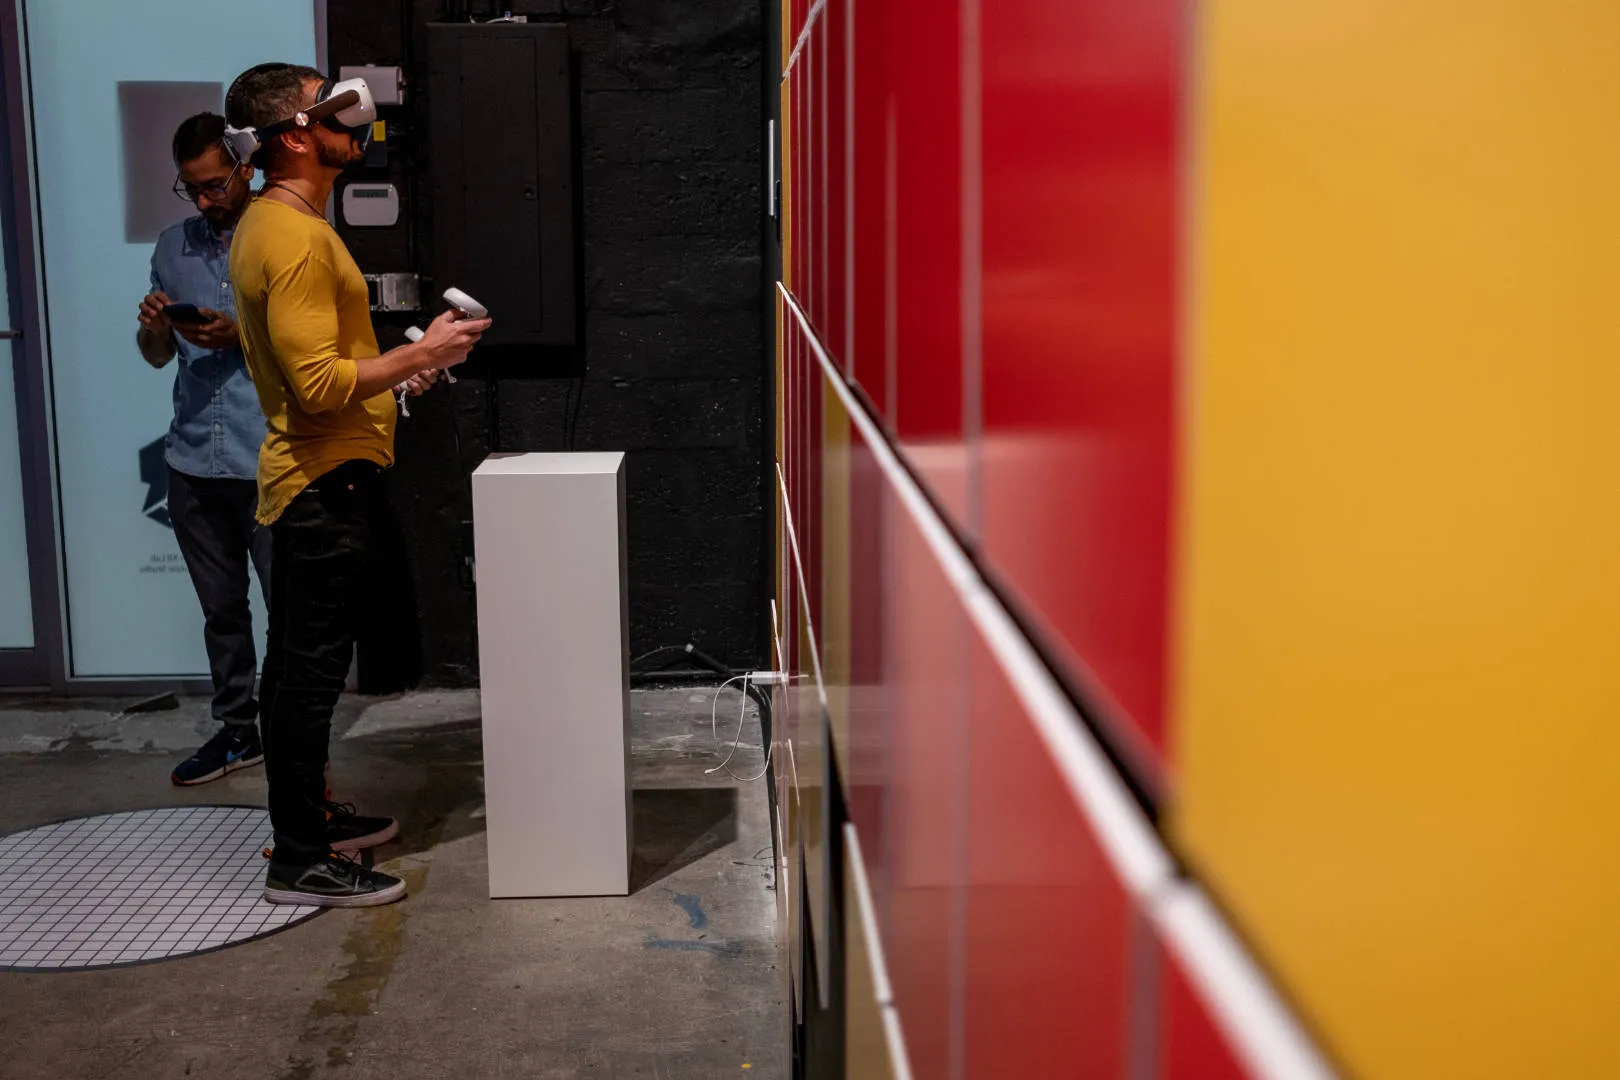 A person standing using an Oculus device, immersed in virtual reality